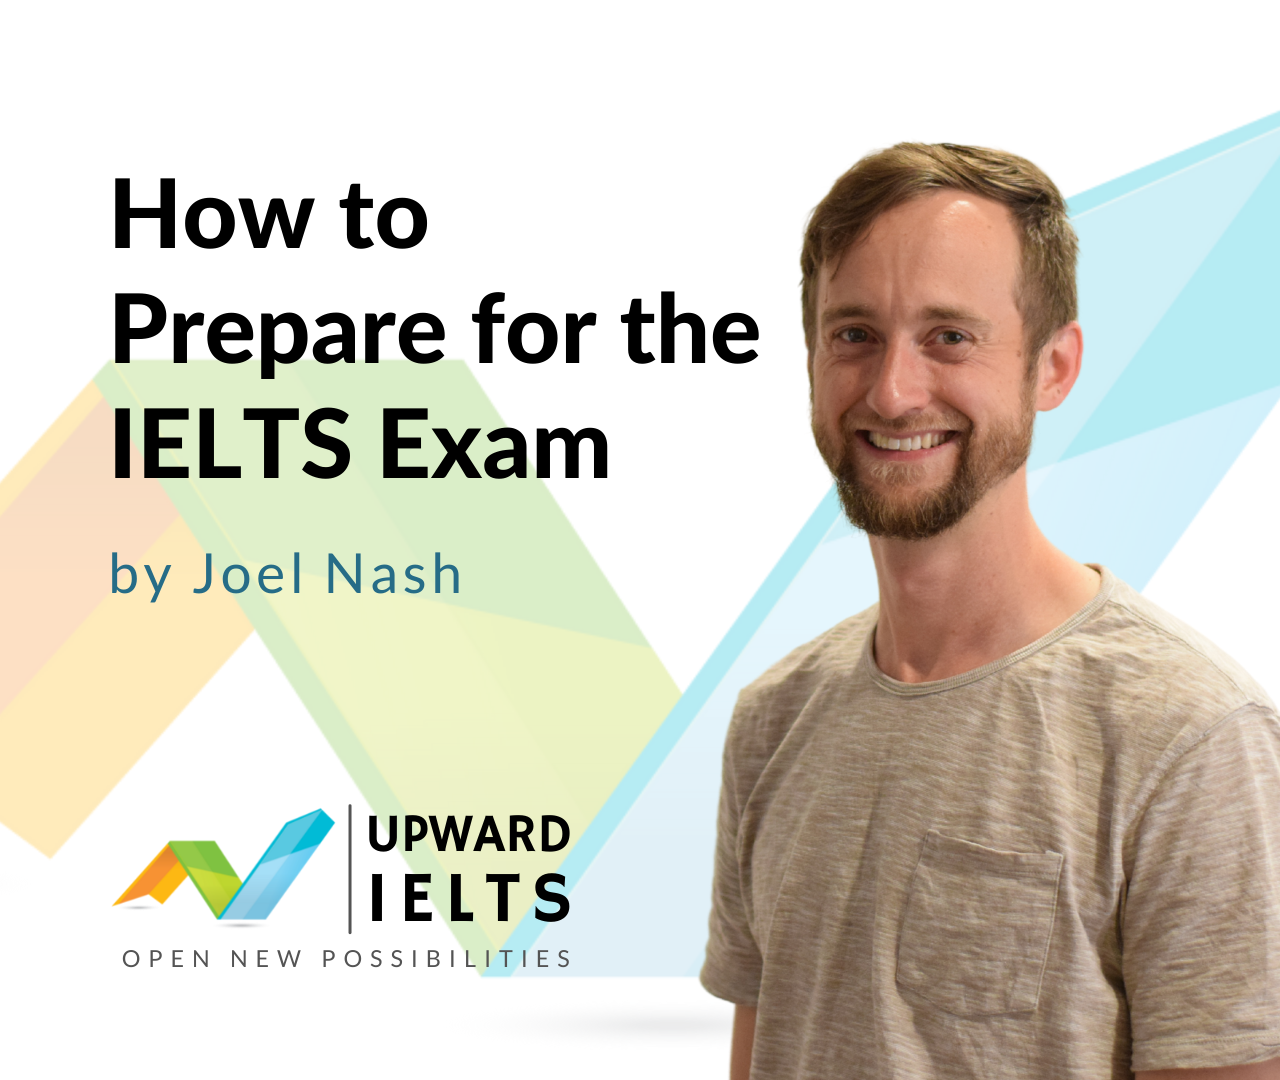 How to Prepare for the IELTS Exam Upward IELTS